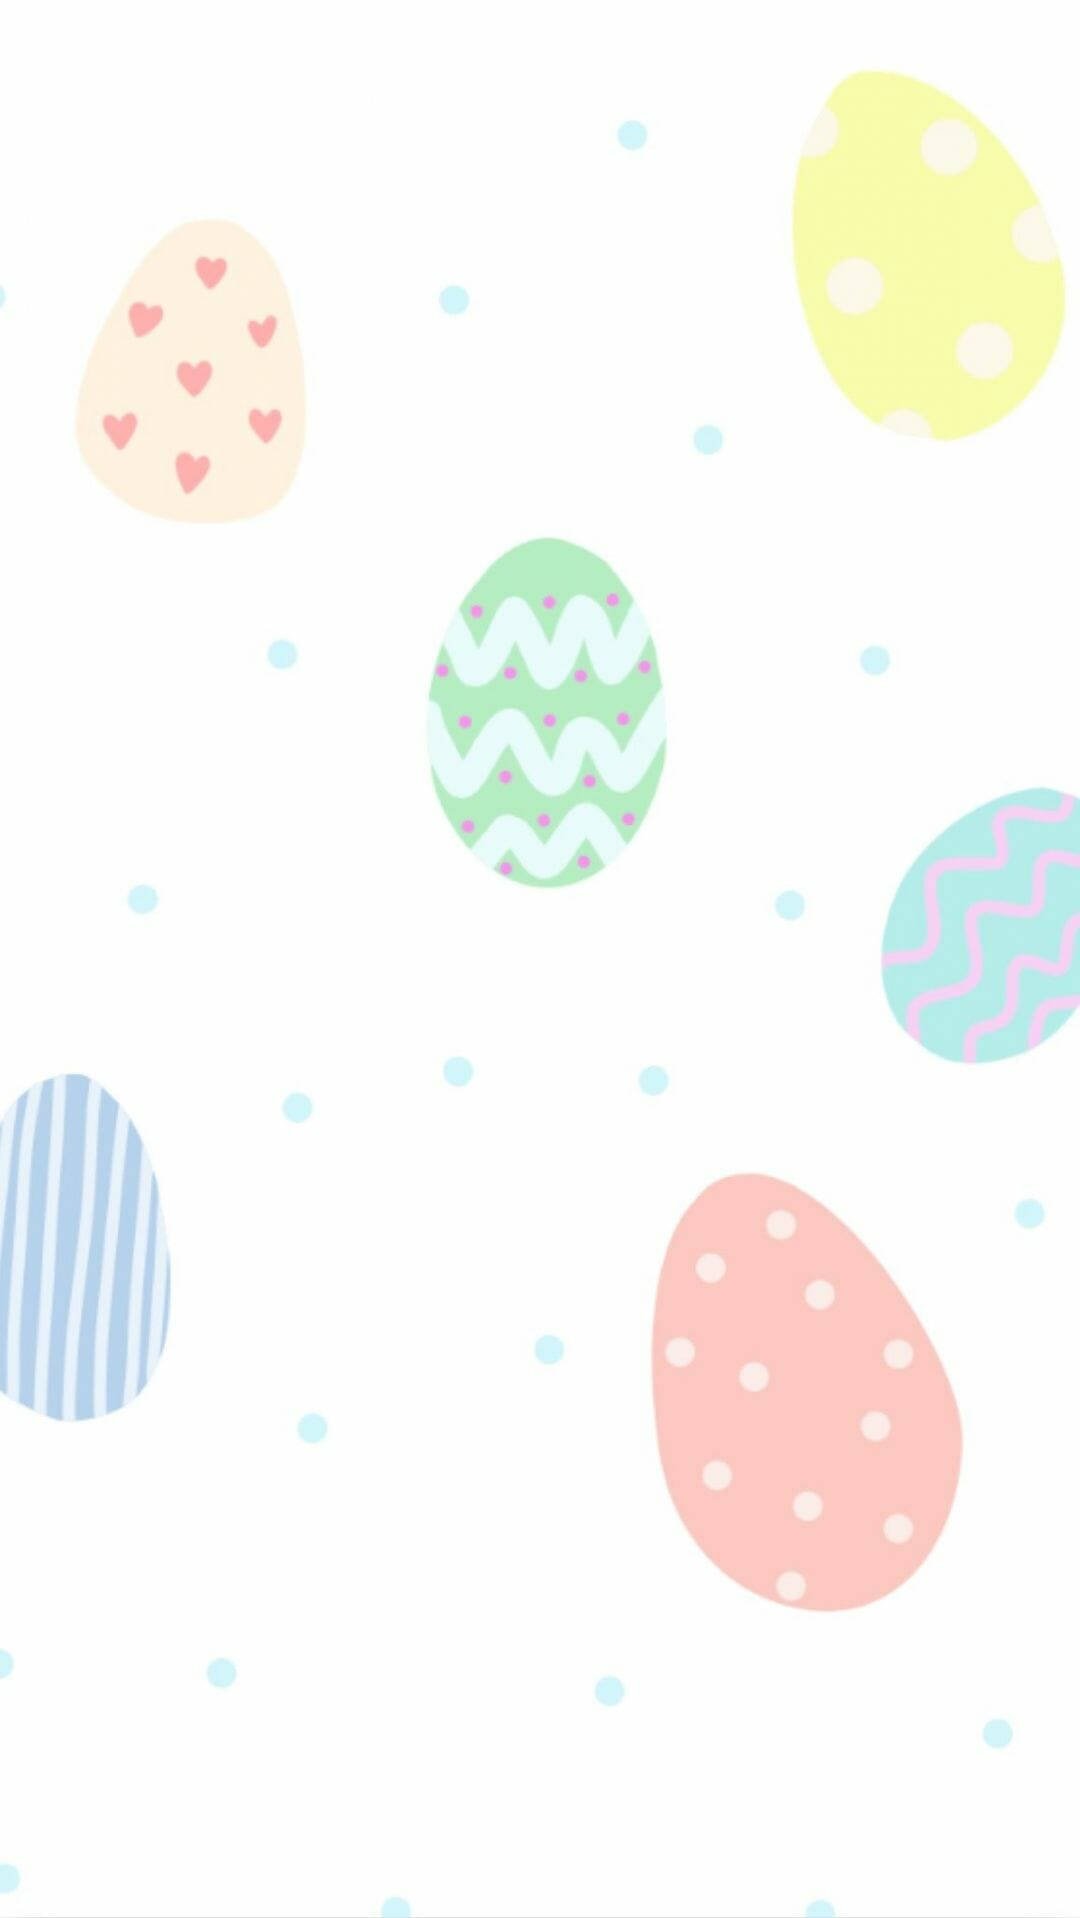 Celebrate Easter with a beautiful aesthetic Wallpaper